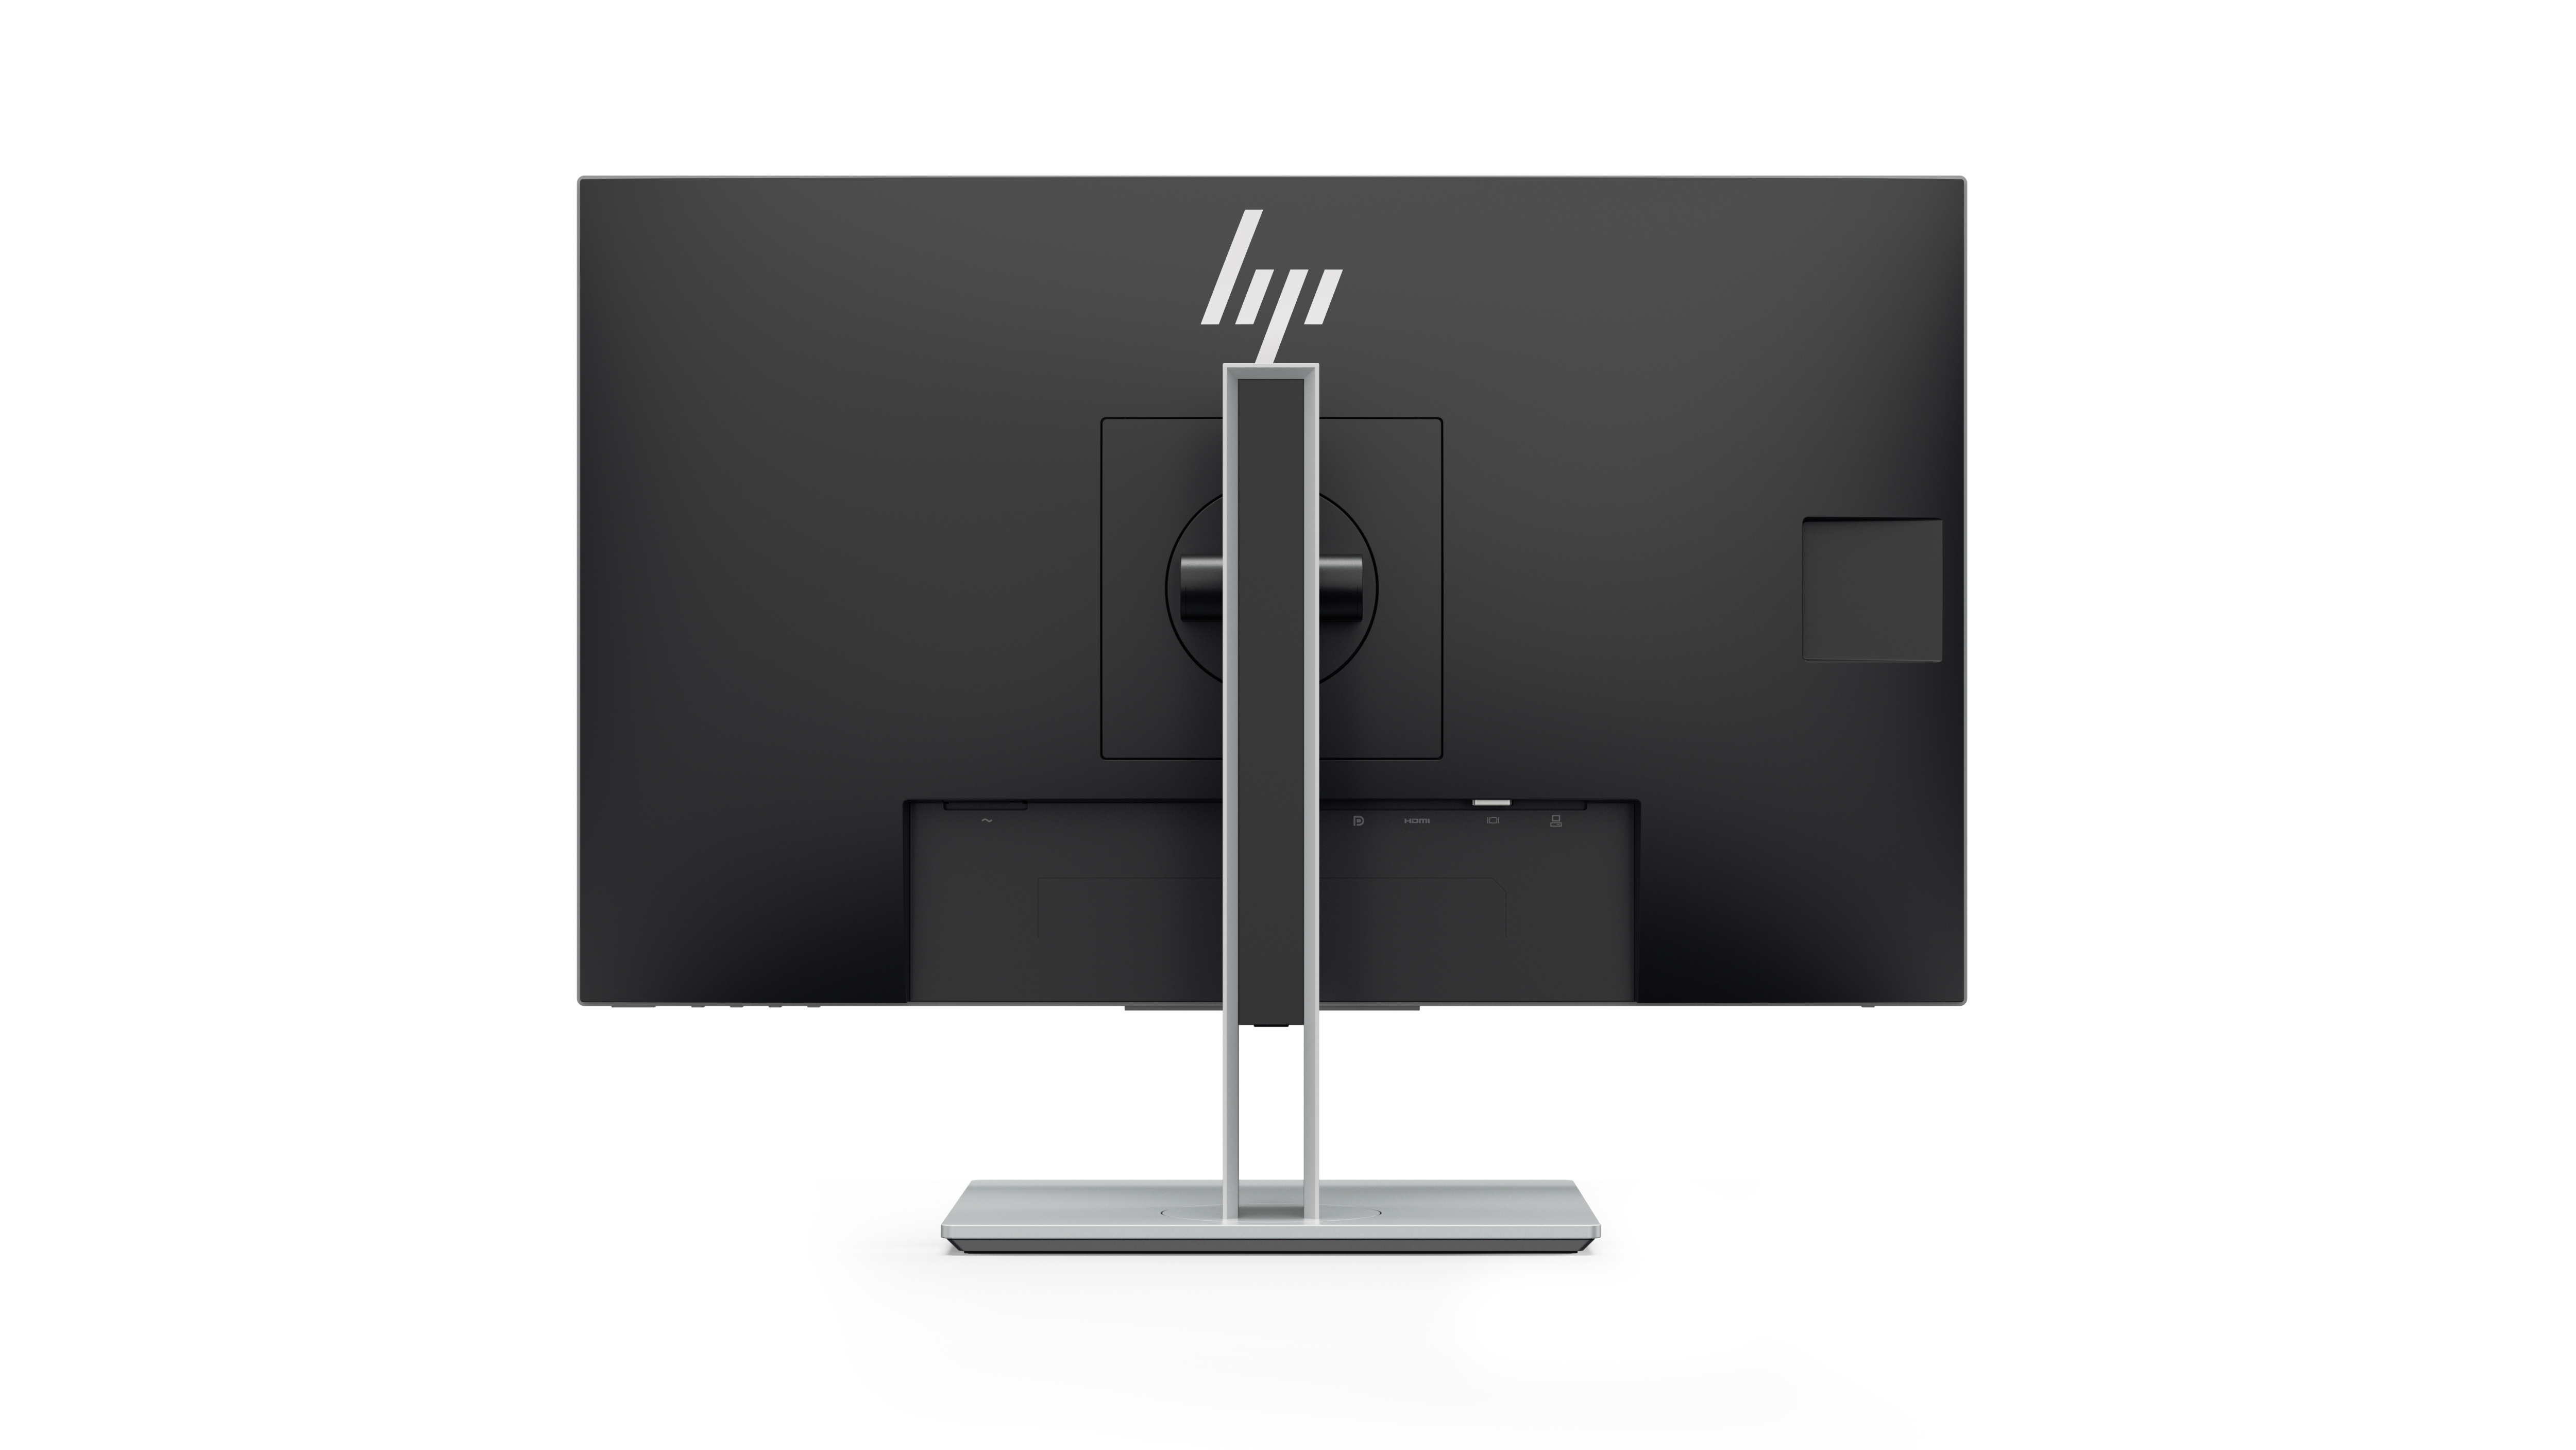 hp launches new monitors and all in one ces 2019 elitedisplay e243p sure view monitor back